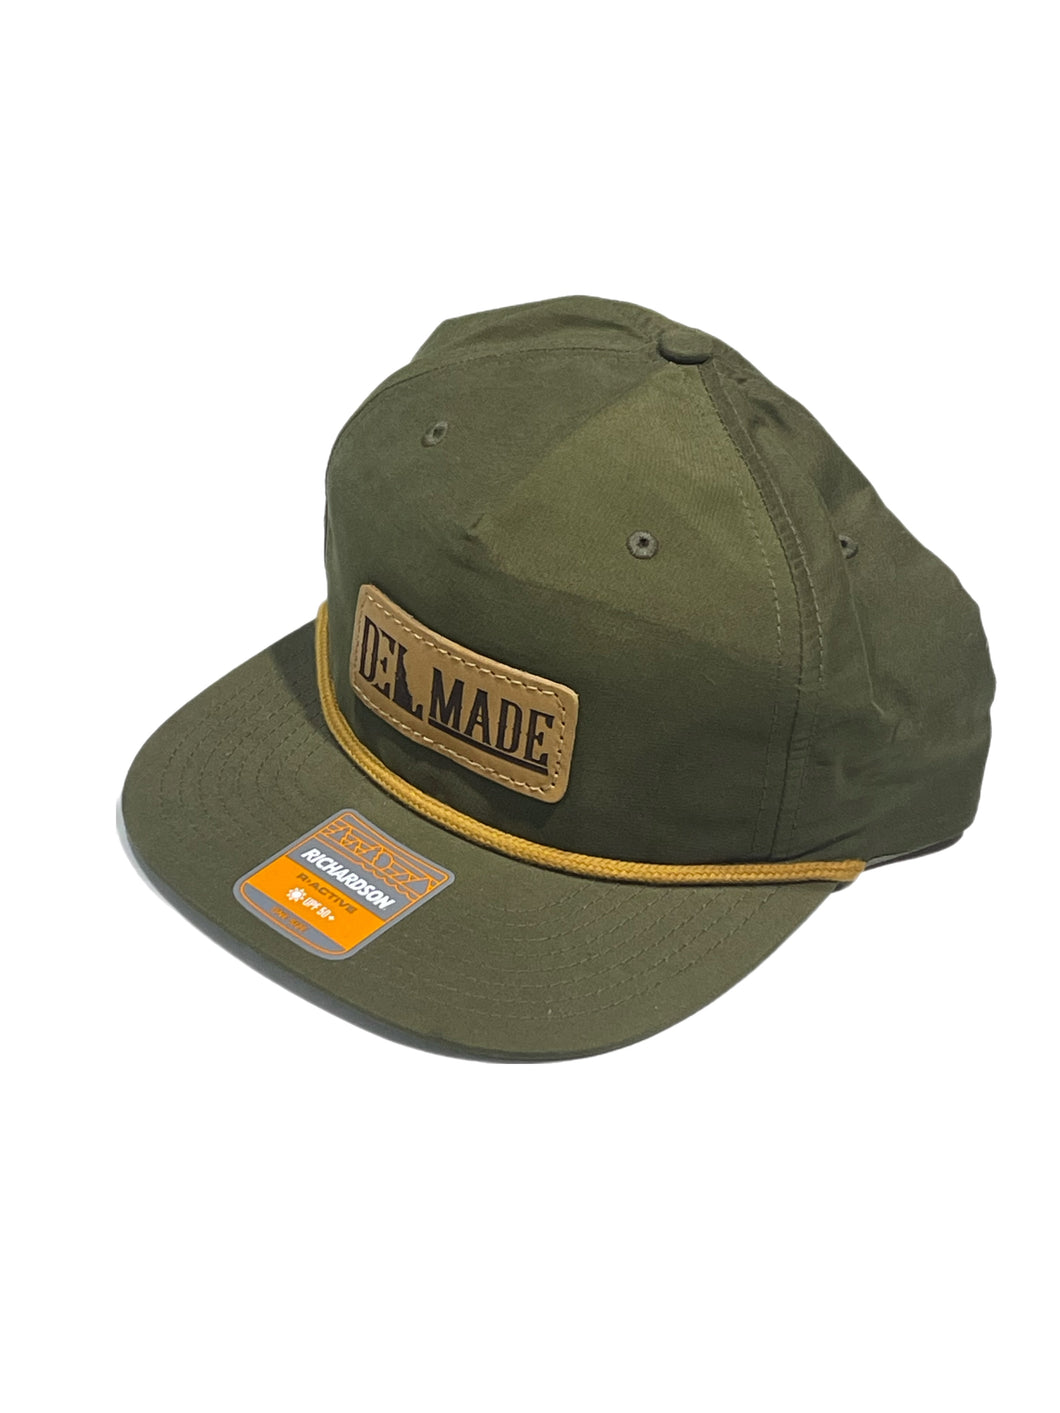 DEL Made Leather Patch Rope Hat